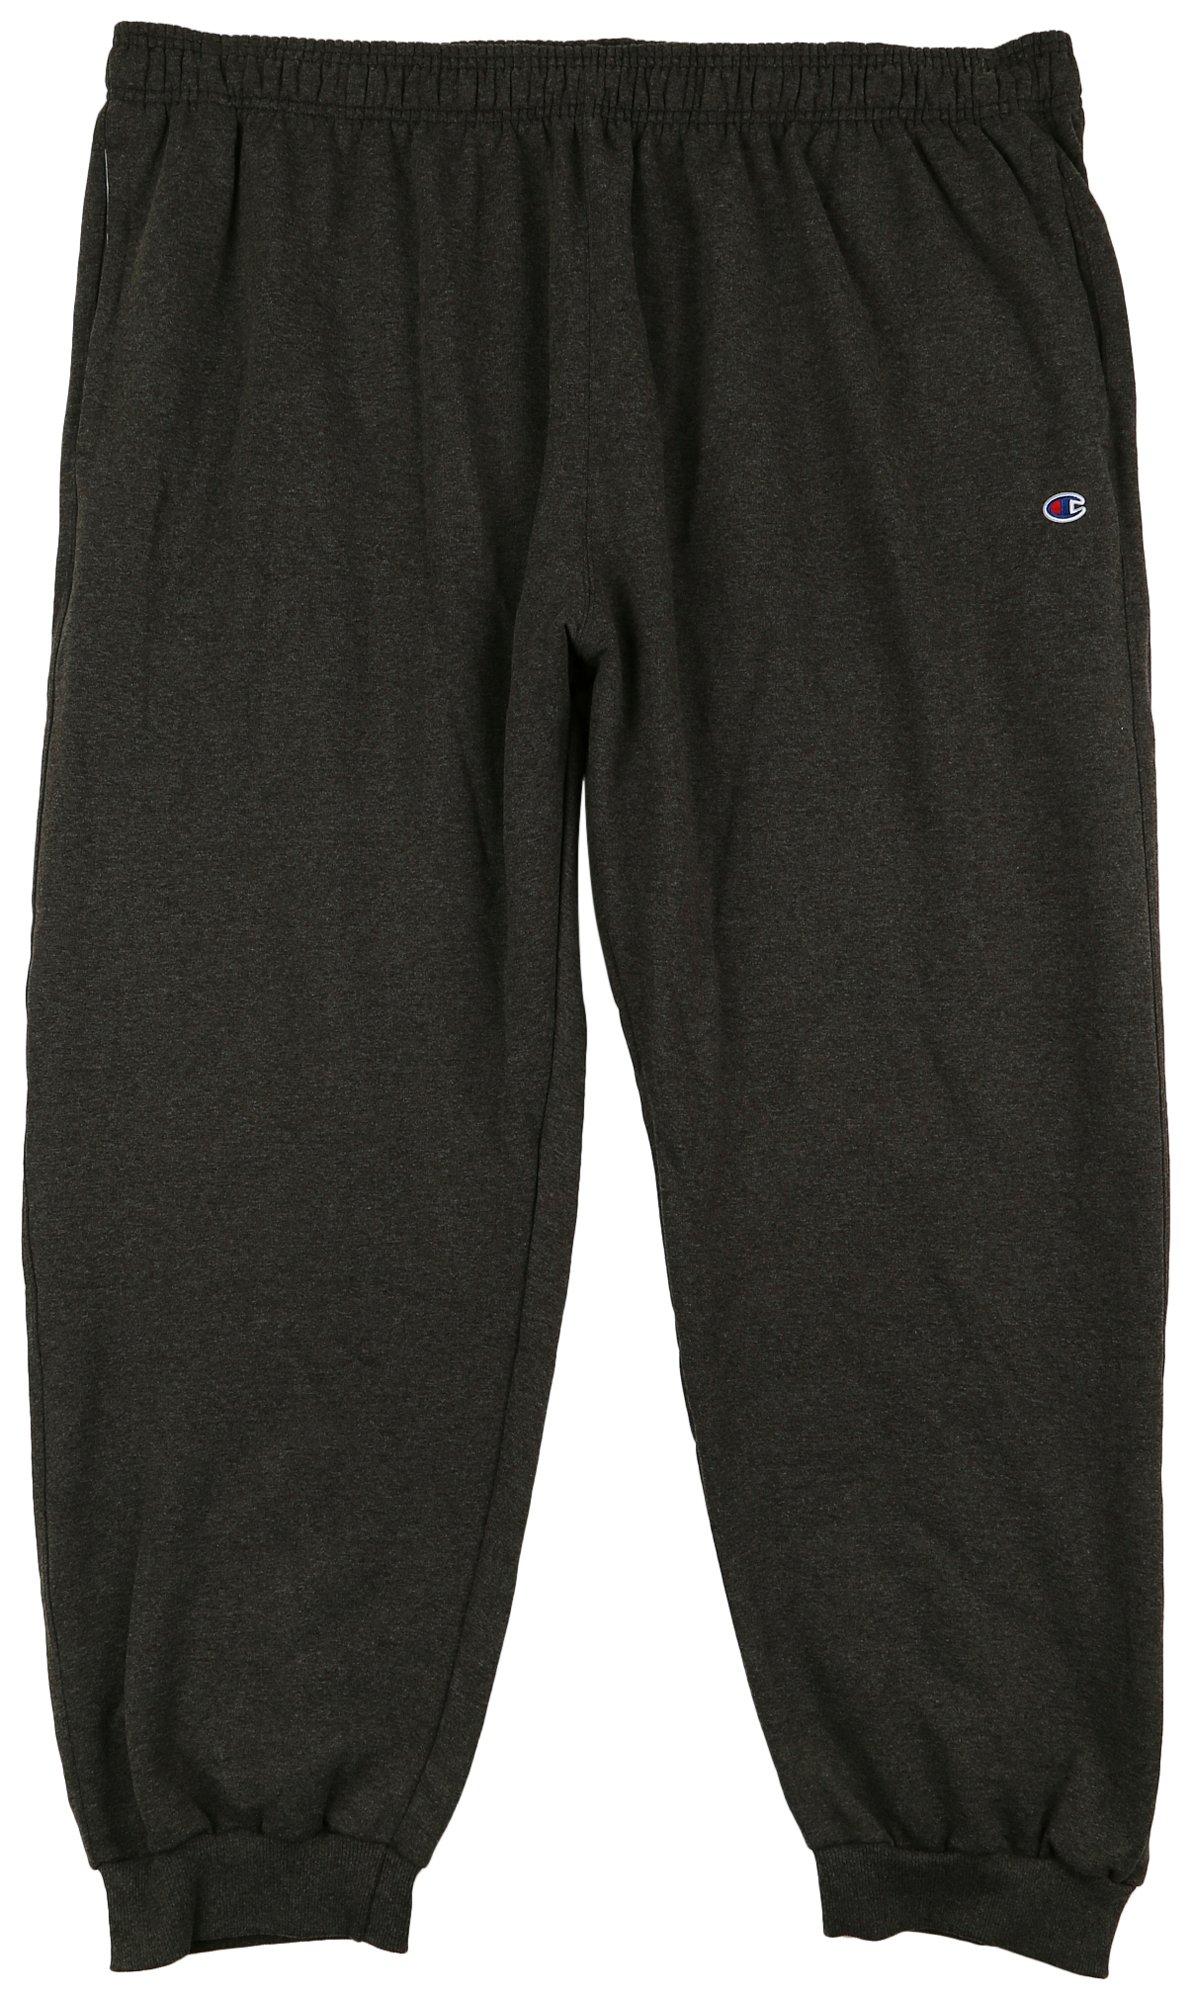 Champion Men's Big & Tall Lounge Pants Authentic Athleticwear